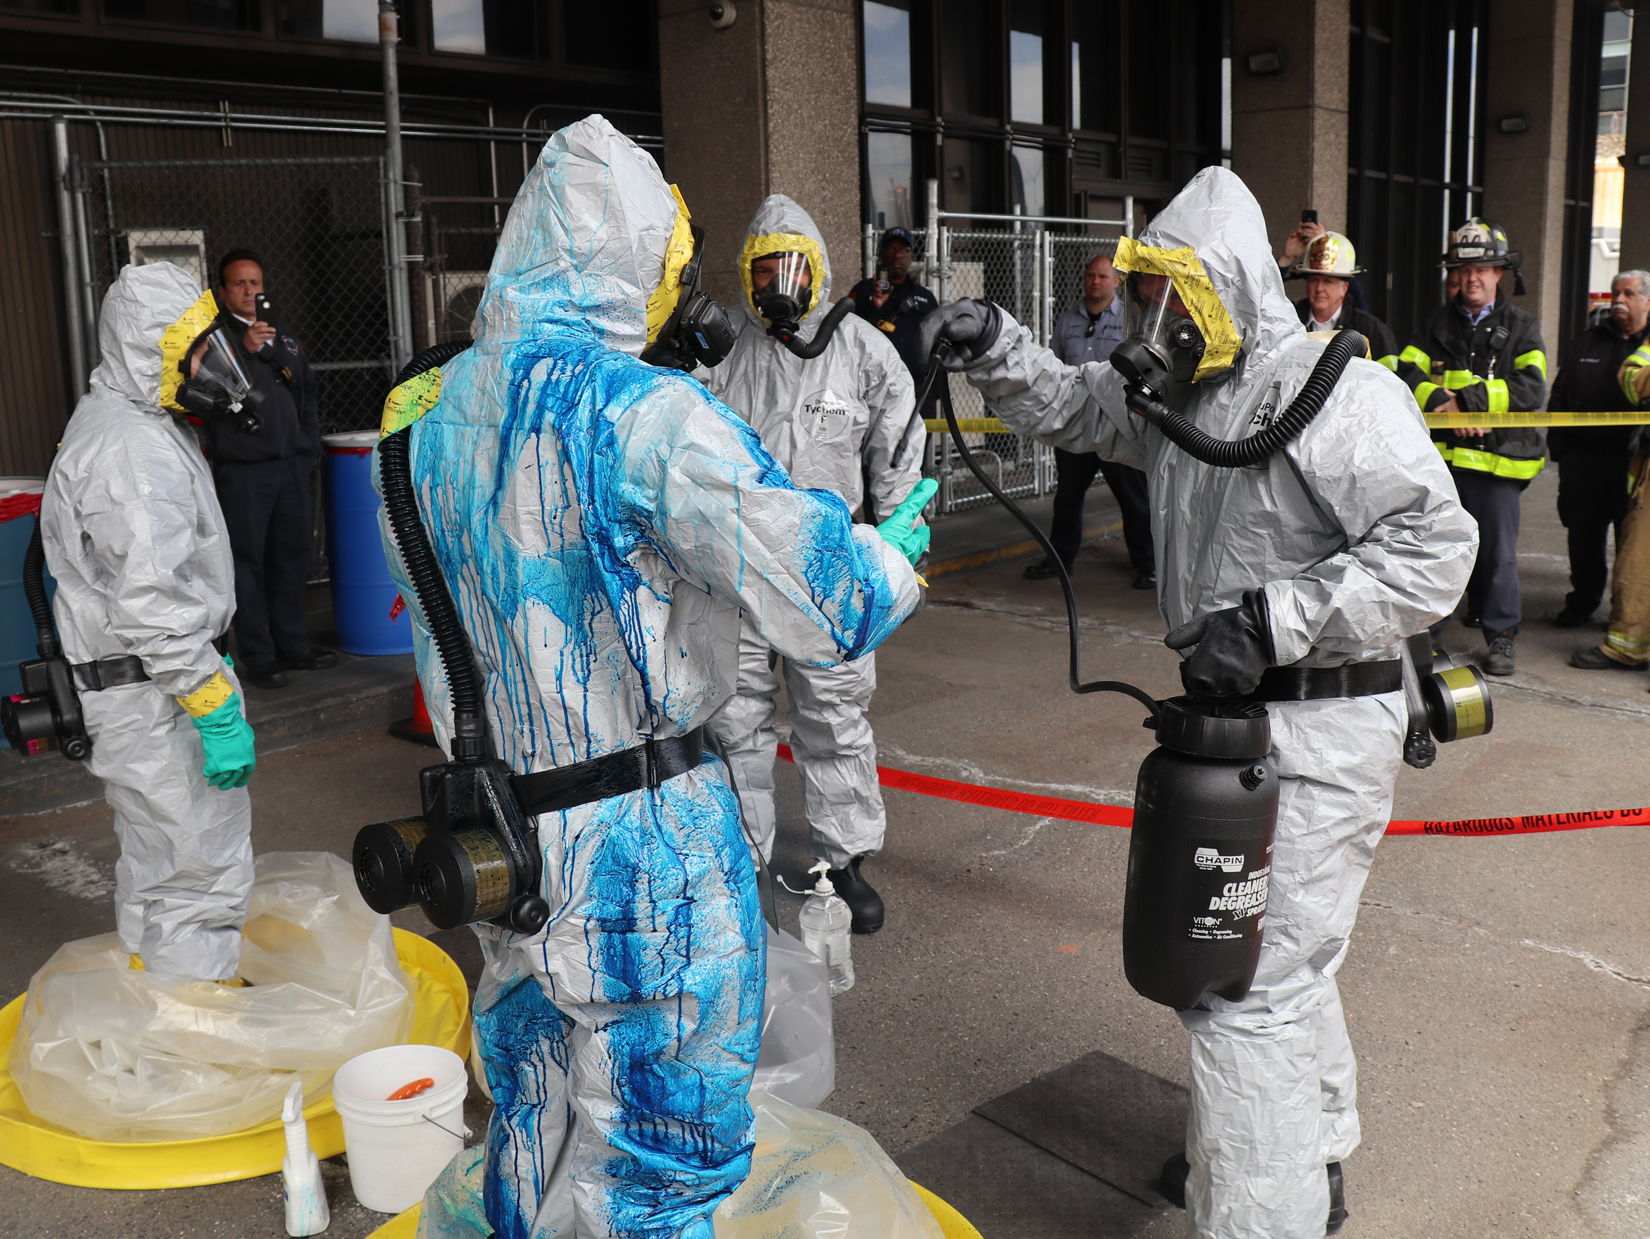 emergency responders dressed in haz-mat suits, with one covered in bleach, are spraying each other with liquids